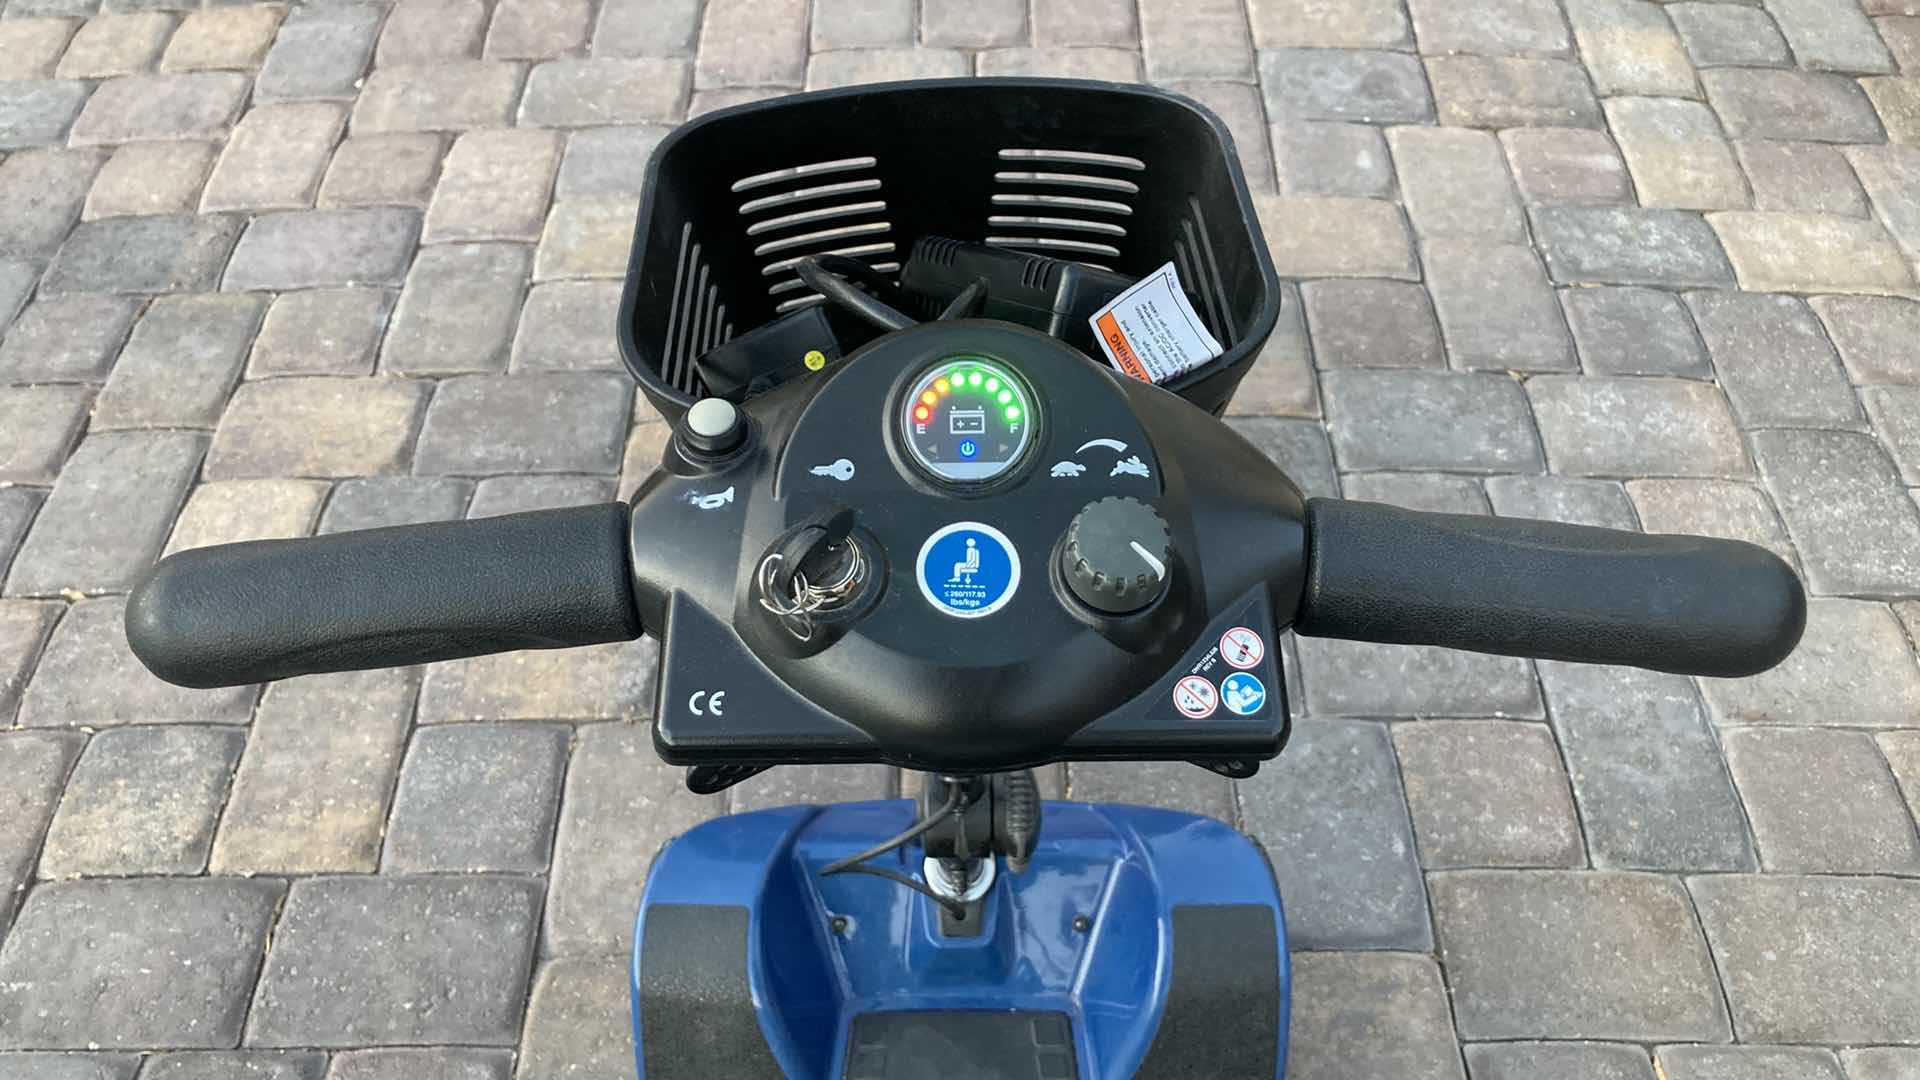 Photo 5 of PRIDE GO-GO ULTRA X SCOOTER W NEW BATTERIES, SEAT PAD, 2 CHARGERS